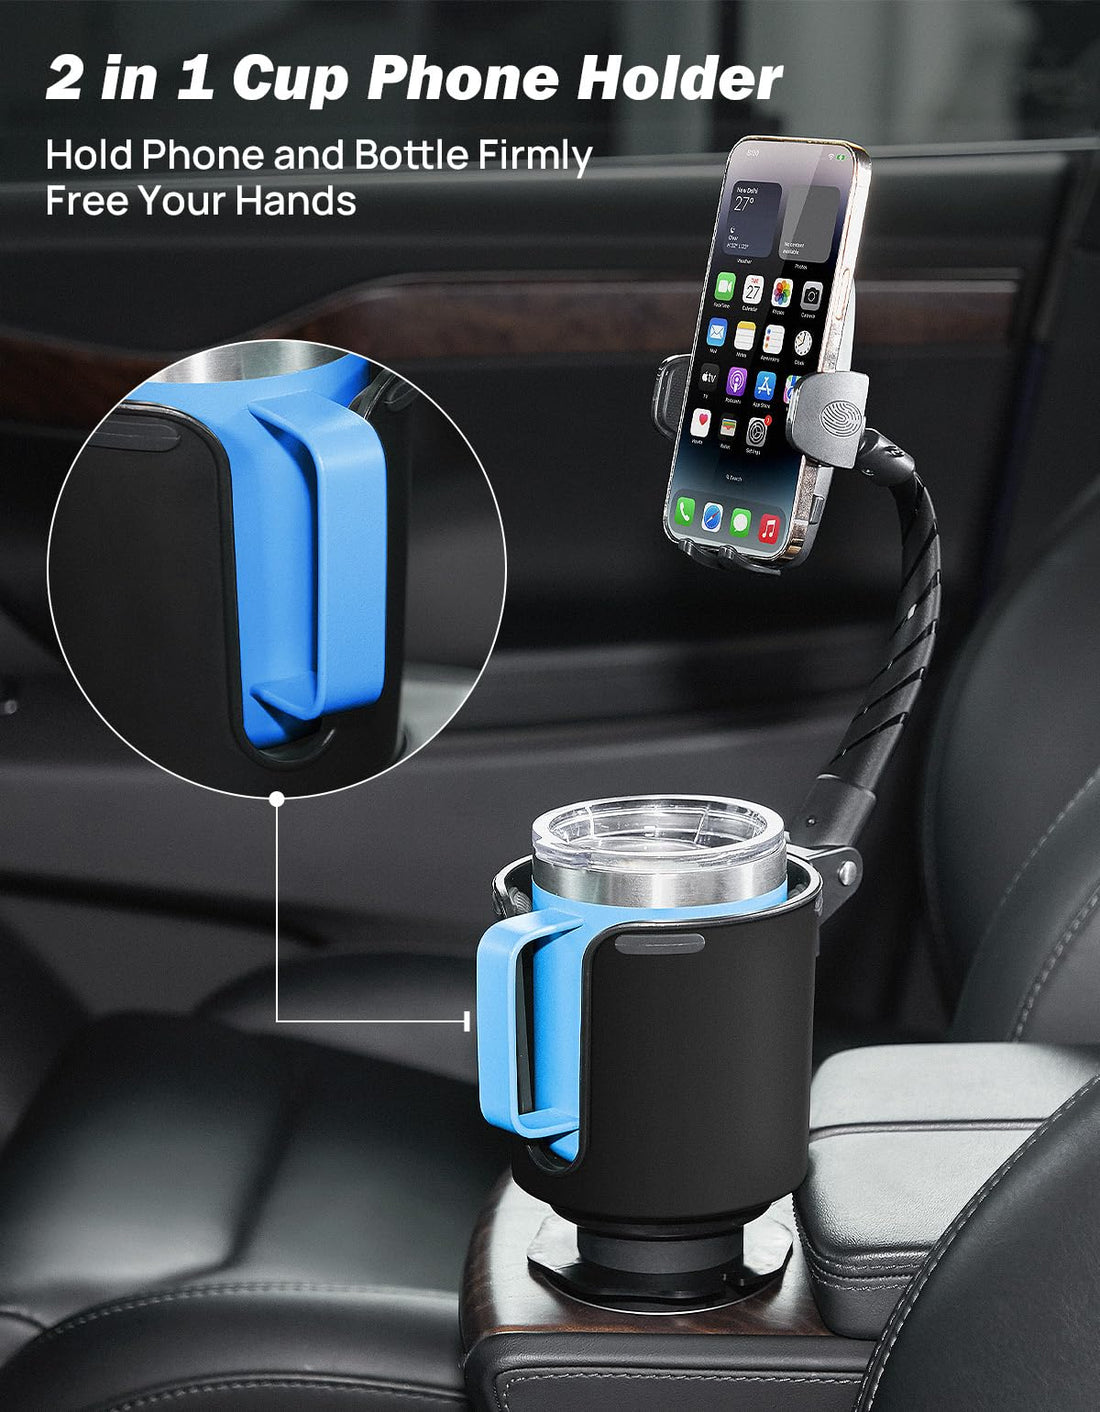 JOYTUTUS Cup Holder Phone Mount for Car, Upgraded Long & Thick Gooseneck Cup Phone Holder